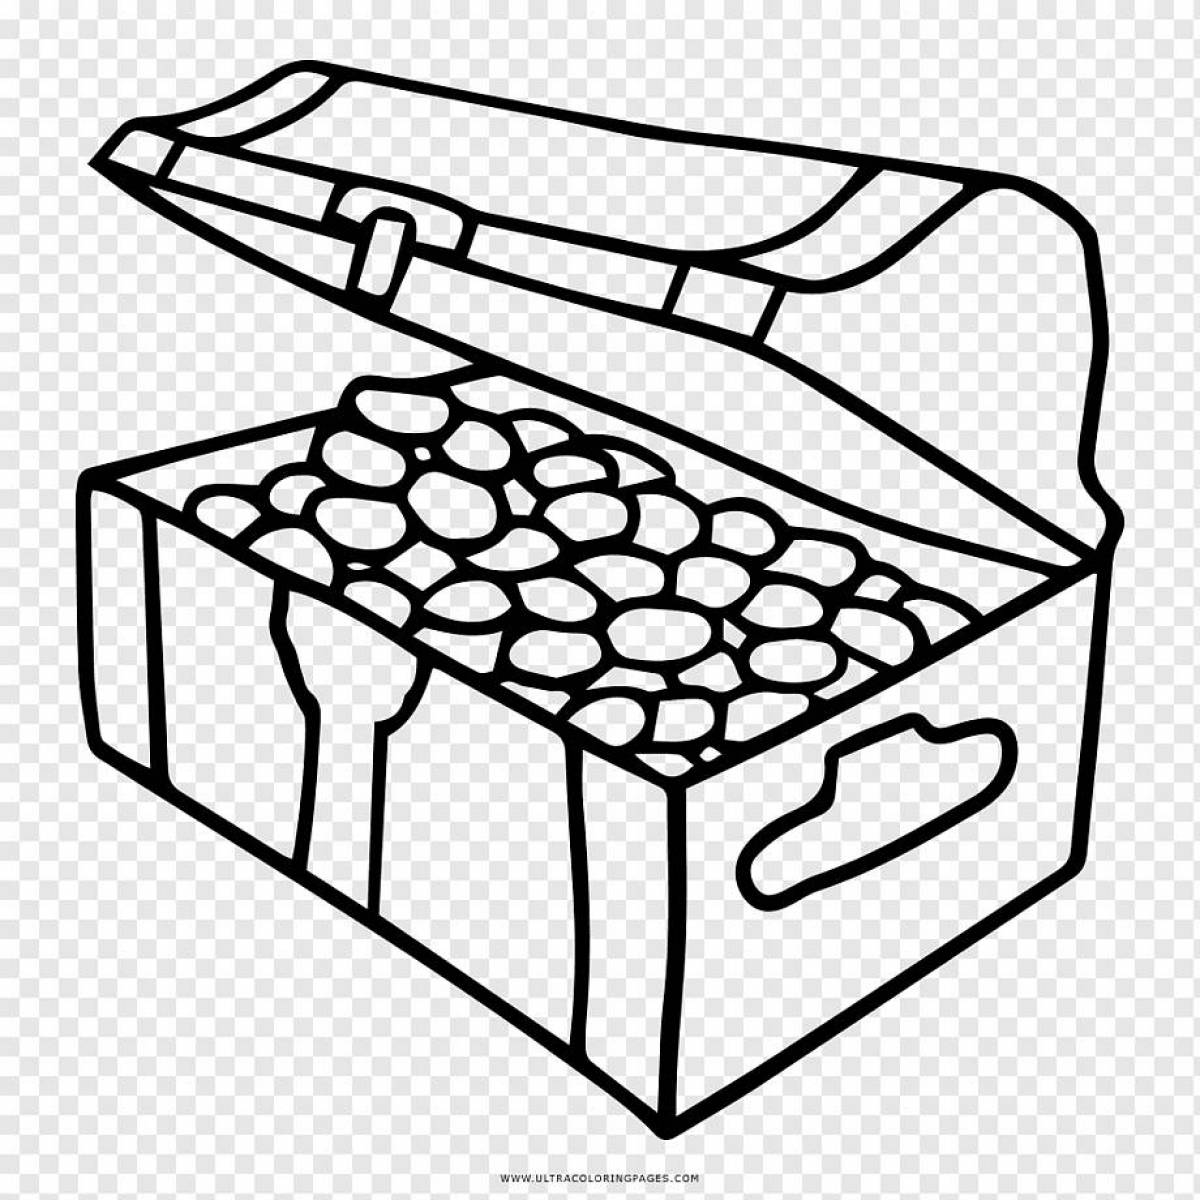 Amazing box coloring page